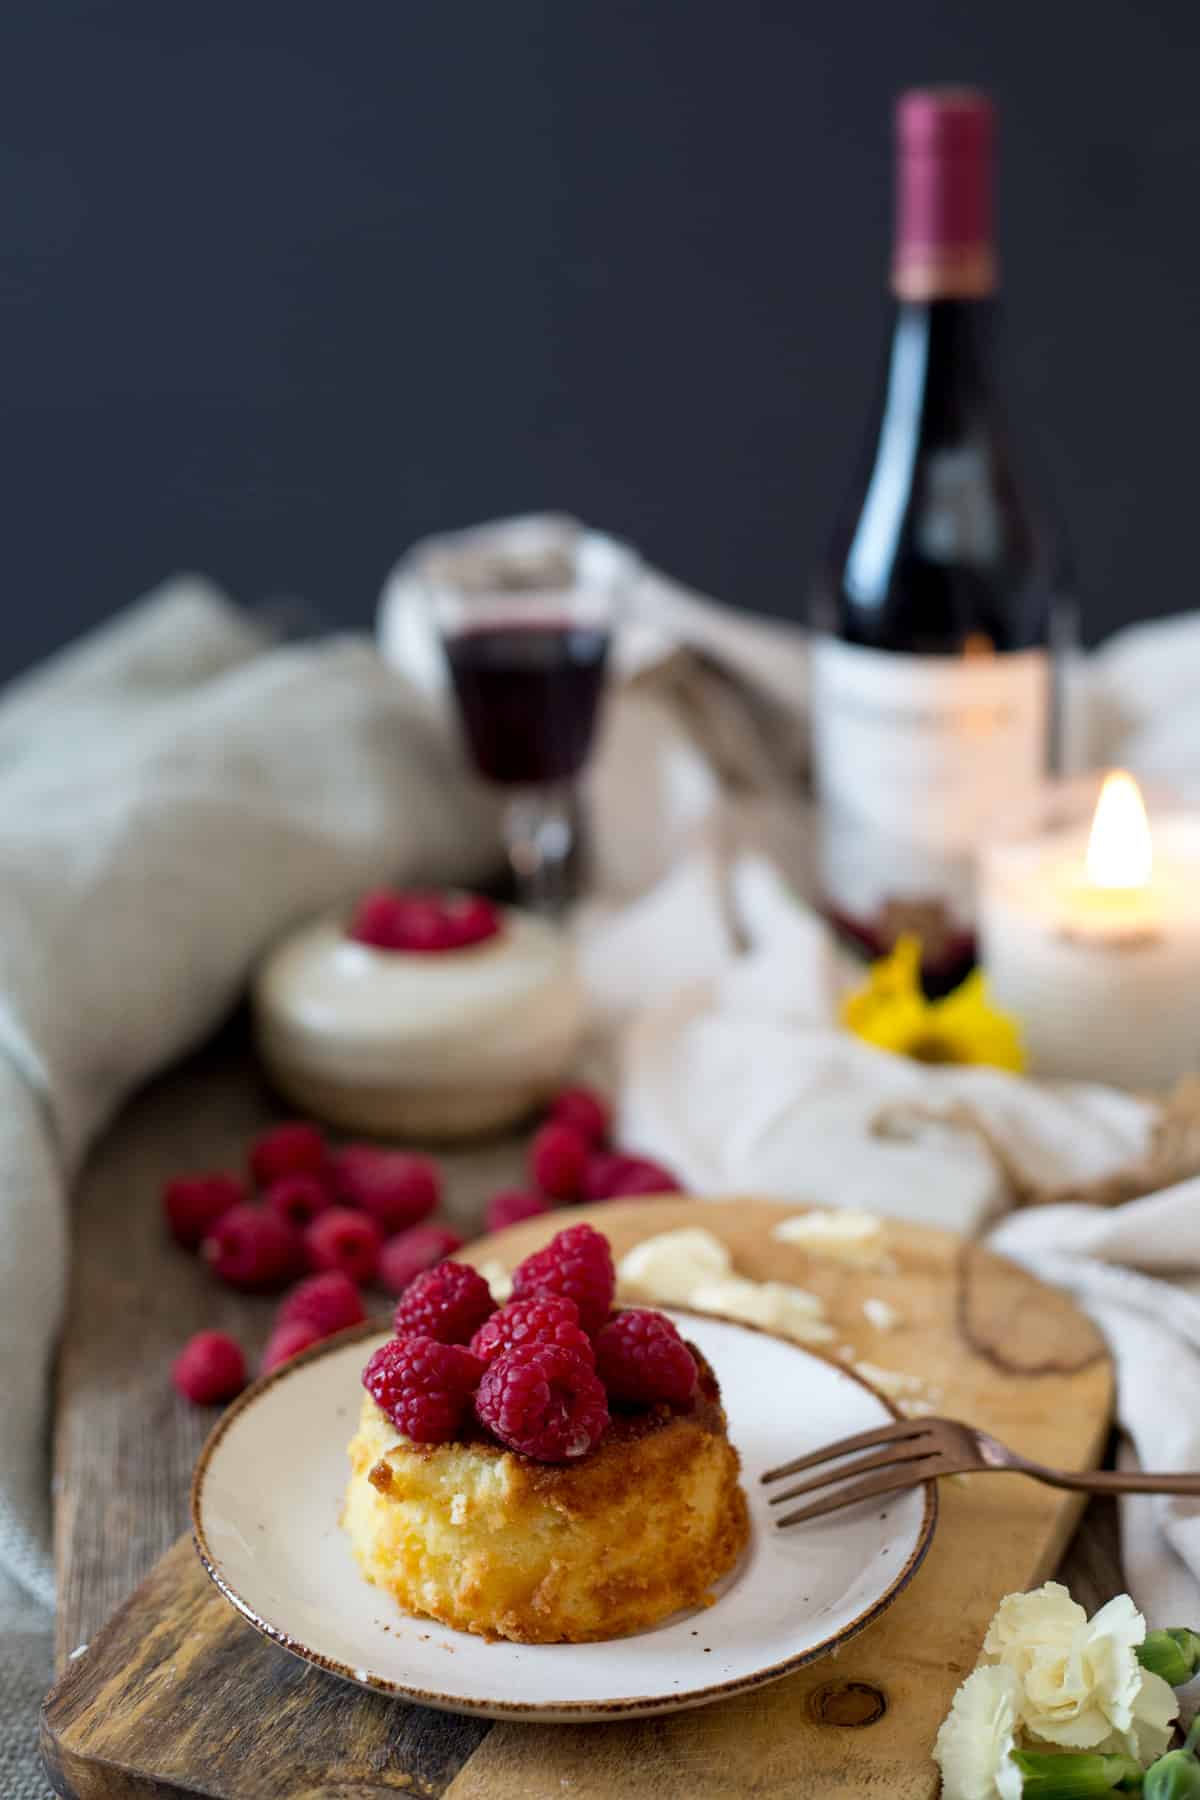 Gluten-free white chocolate lava cakes with raspberries and my winter self-care guide